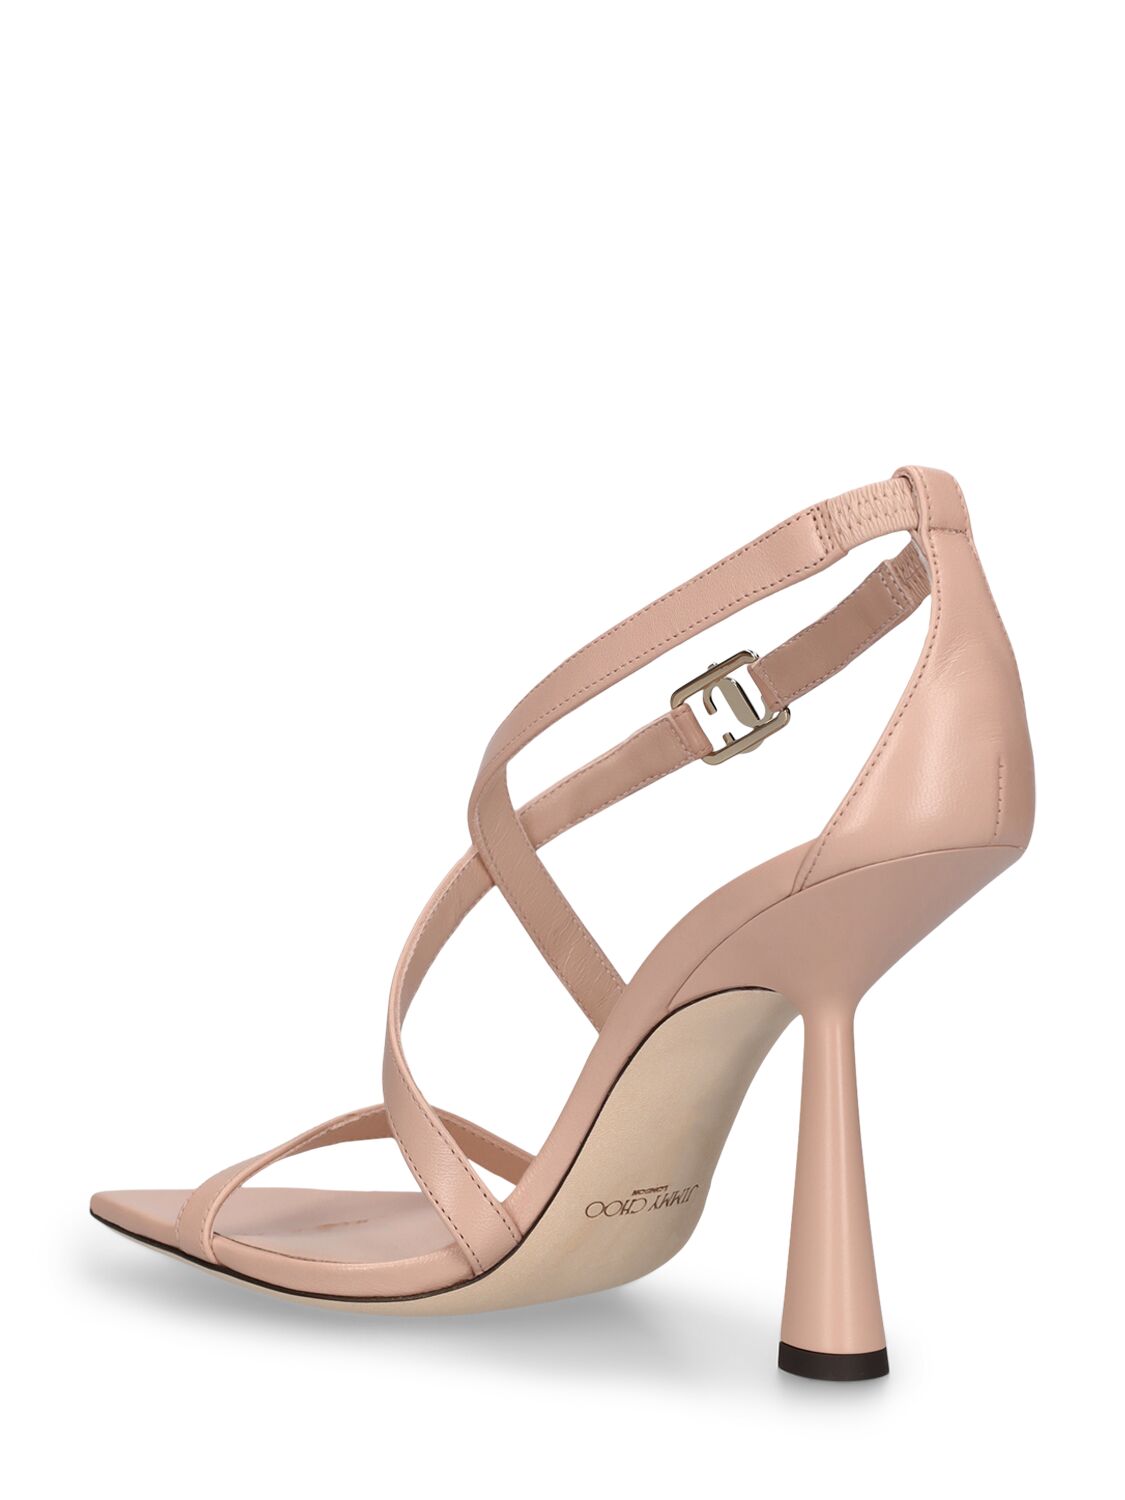 Shop Jimmy Choo 100mm Jessica Leather Sandals In Nude